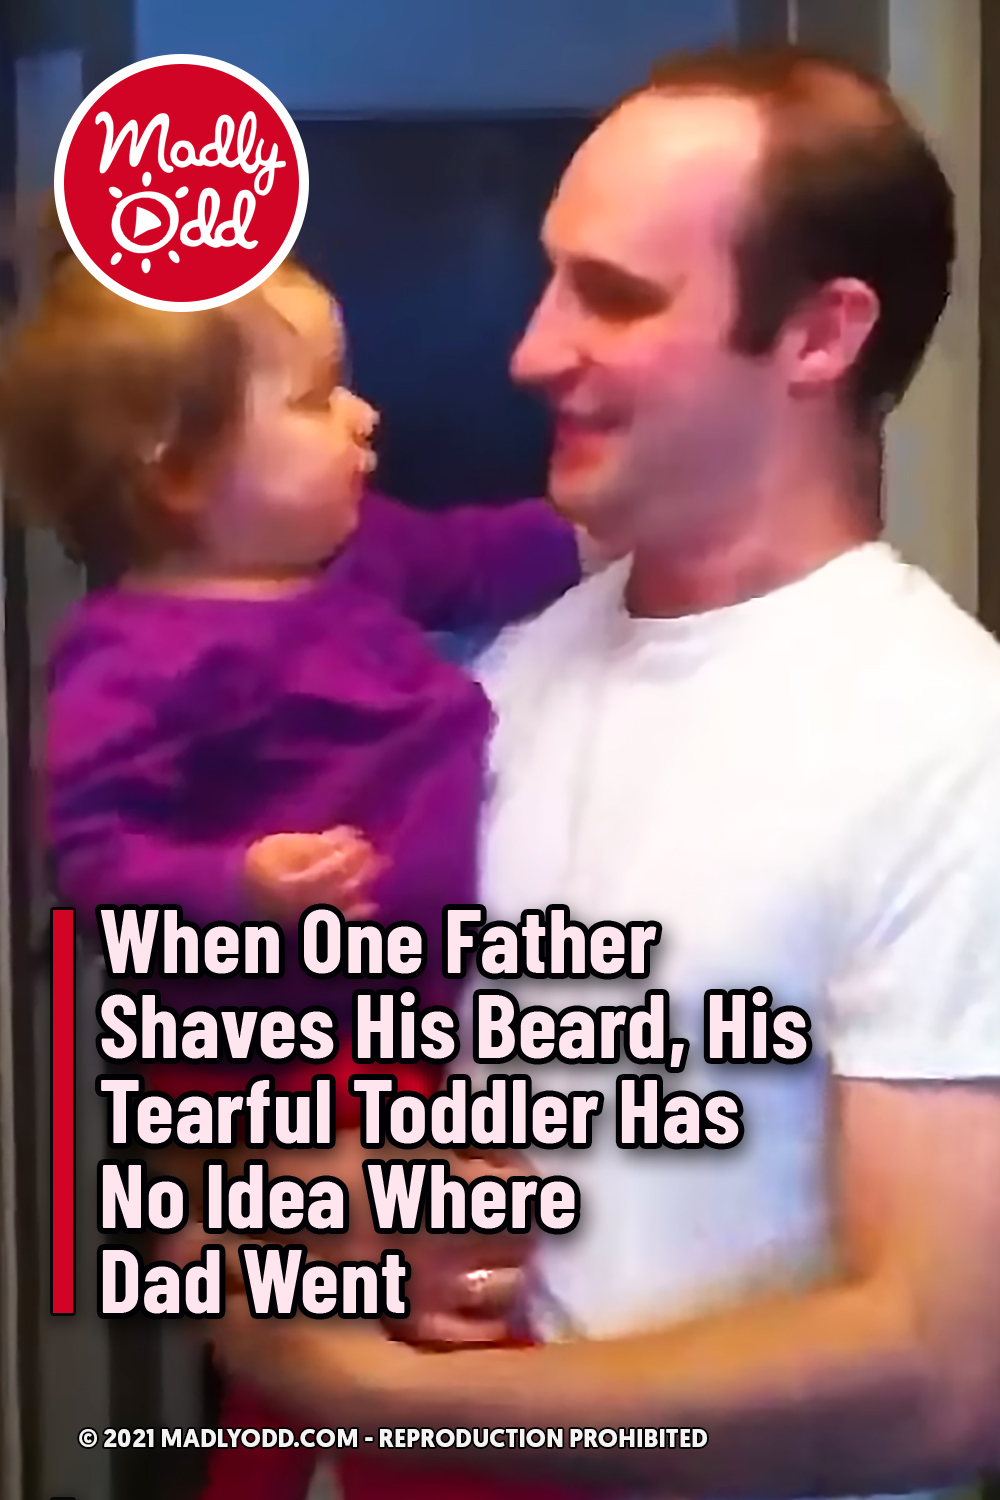 When One Father Shaves His Beard, His Tearful Toddler Has No Idea Where Dad Went